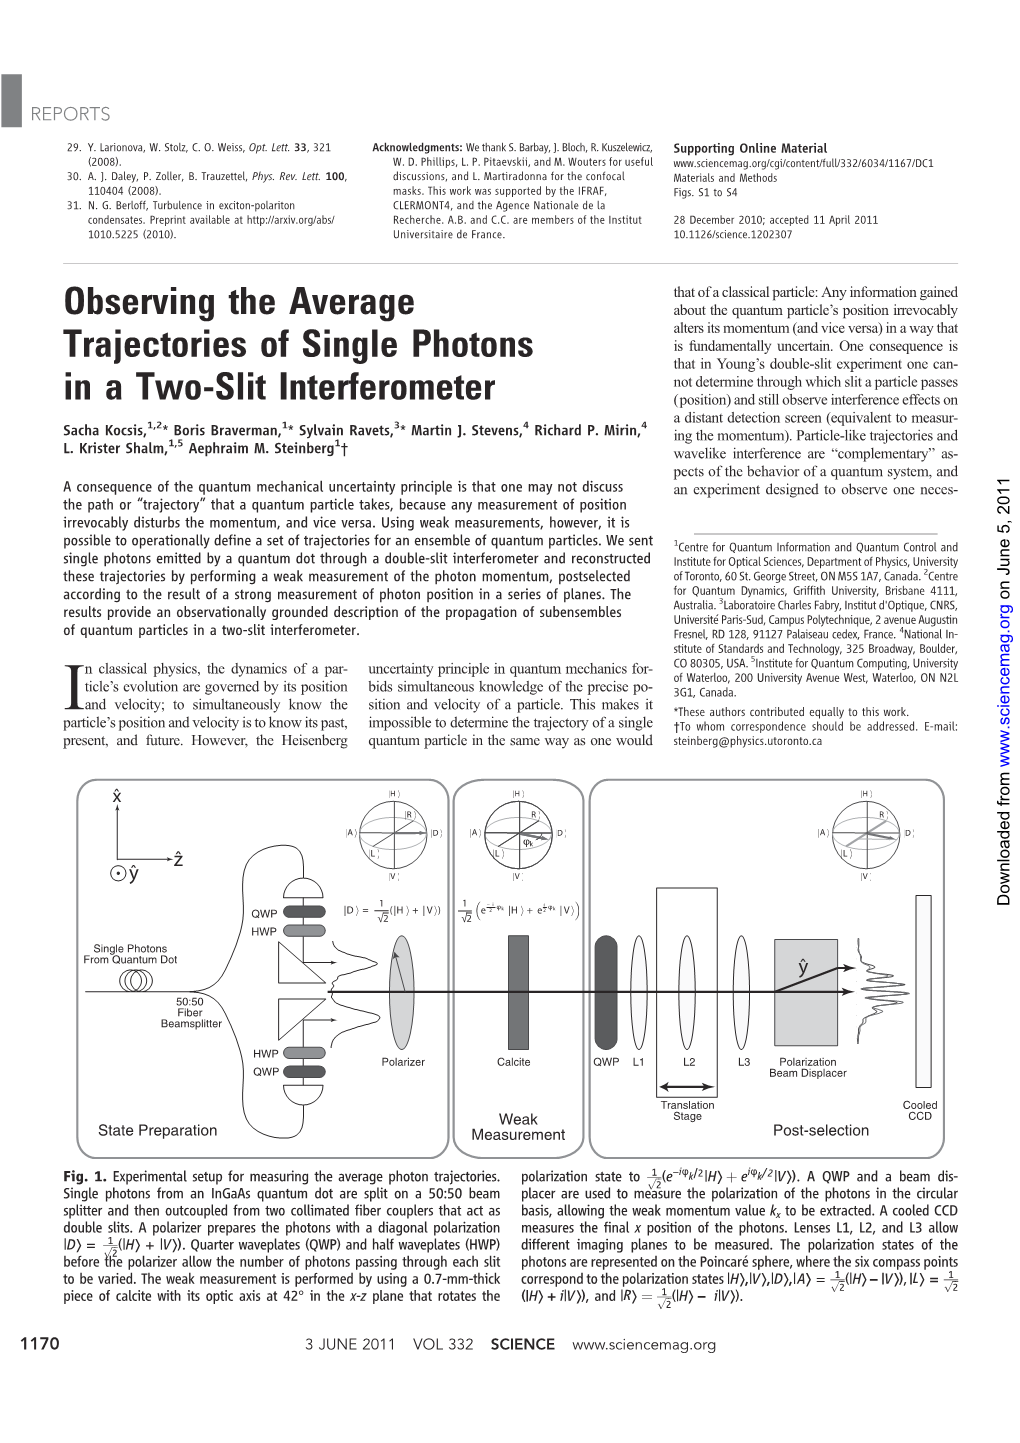 Observing the Average Trajectories of Single Photons in a Two-Slit Interferometer